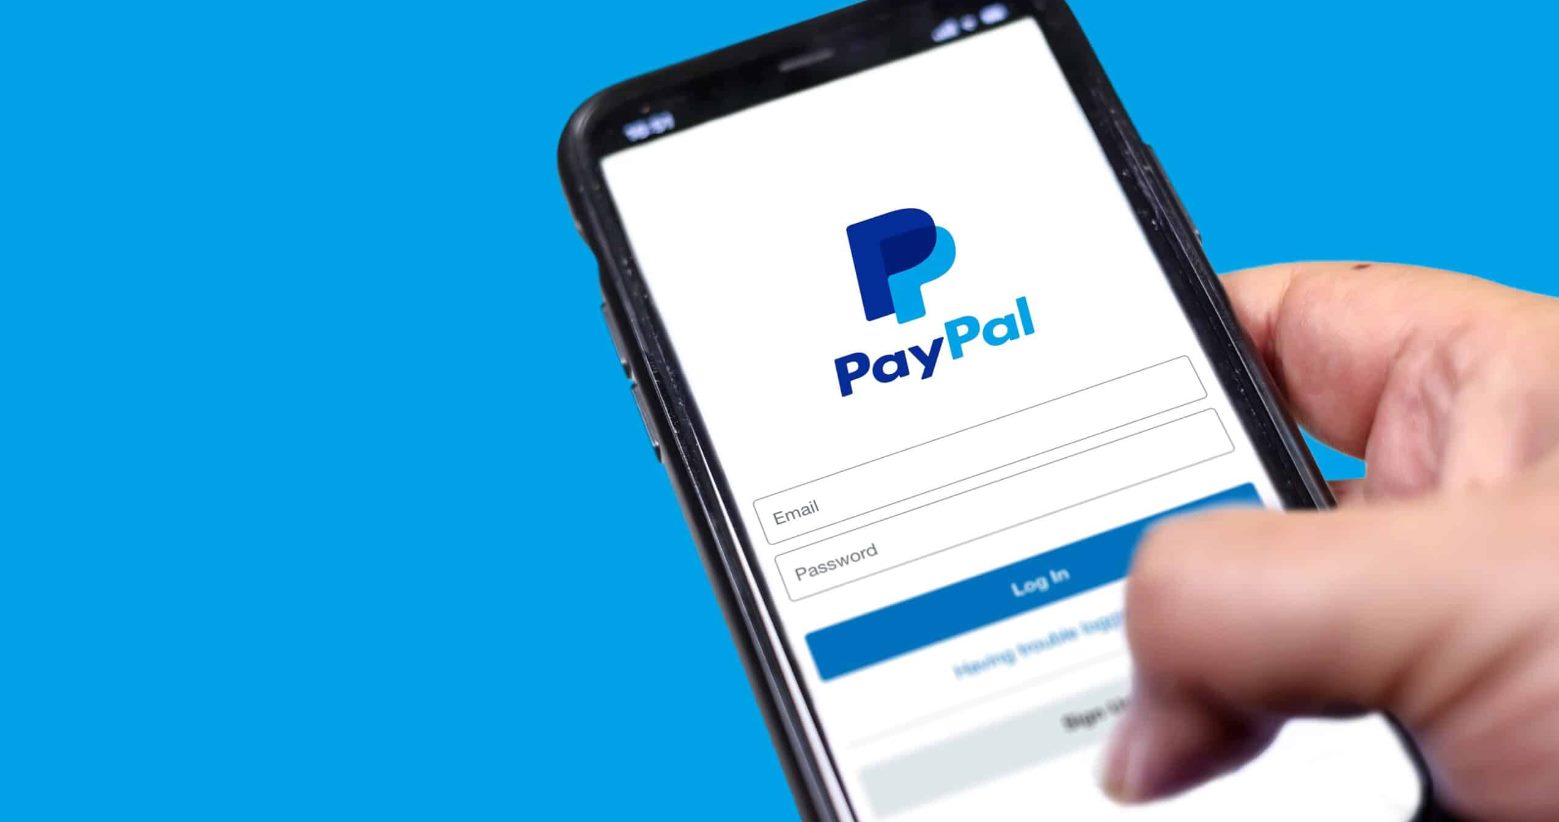 How To Add Money To Your PayPal Account